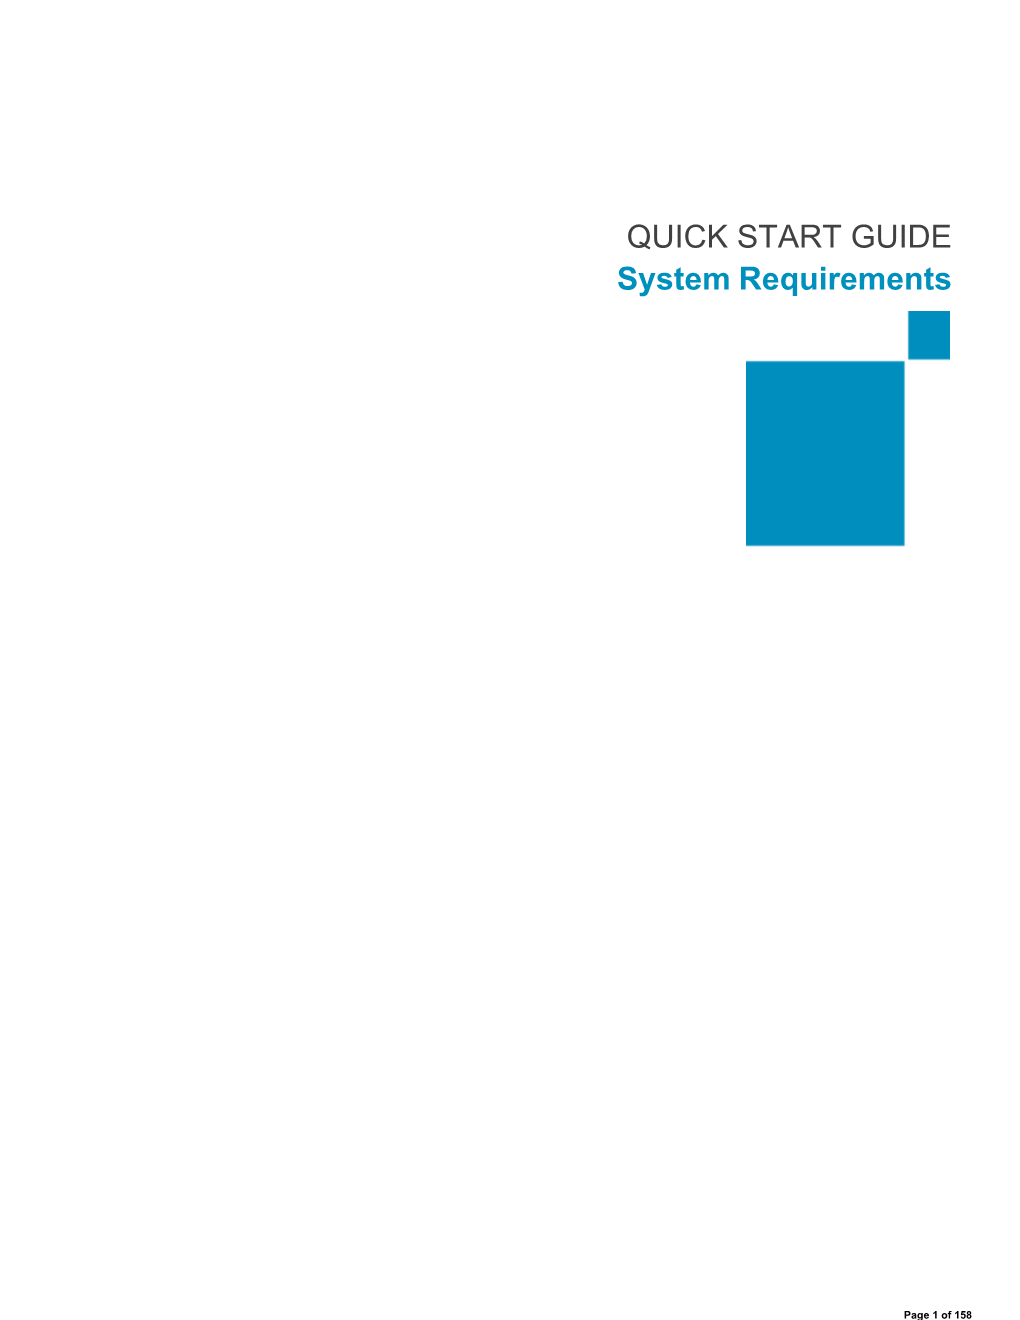 QUICK START GUIDE System Requirements